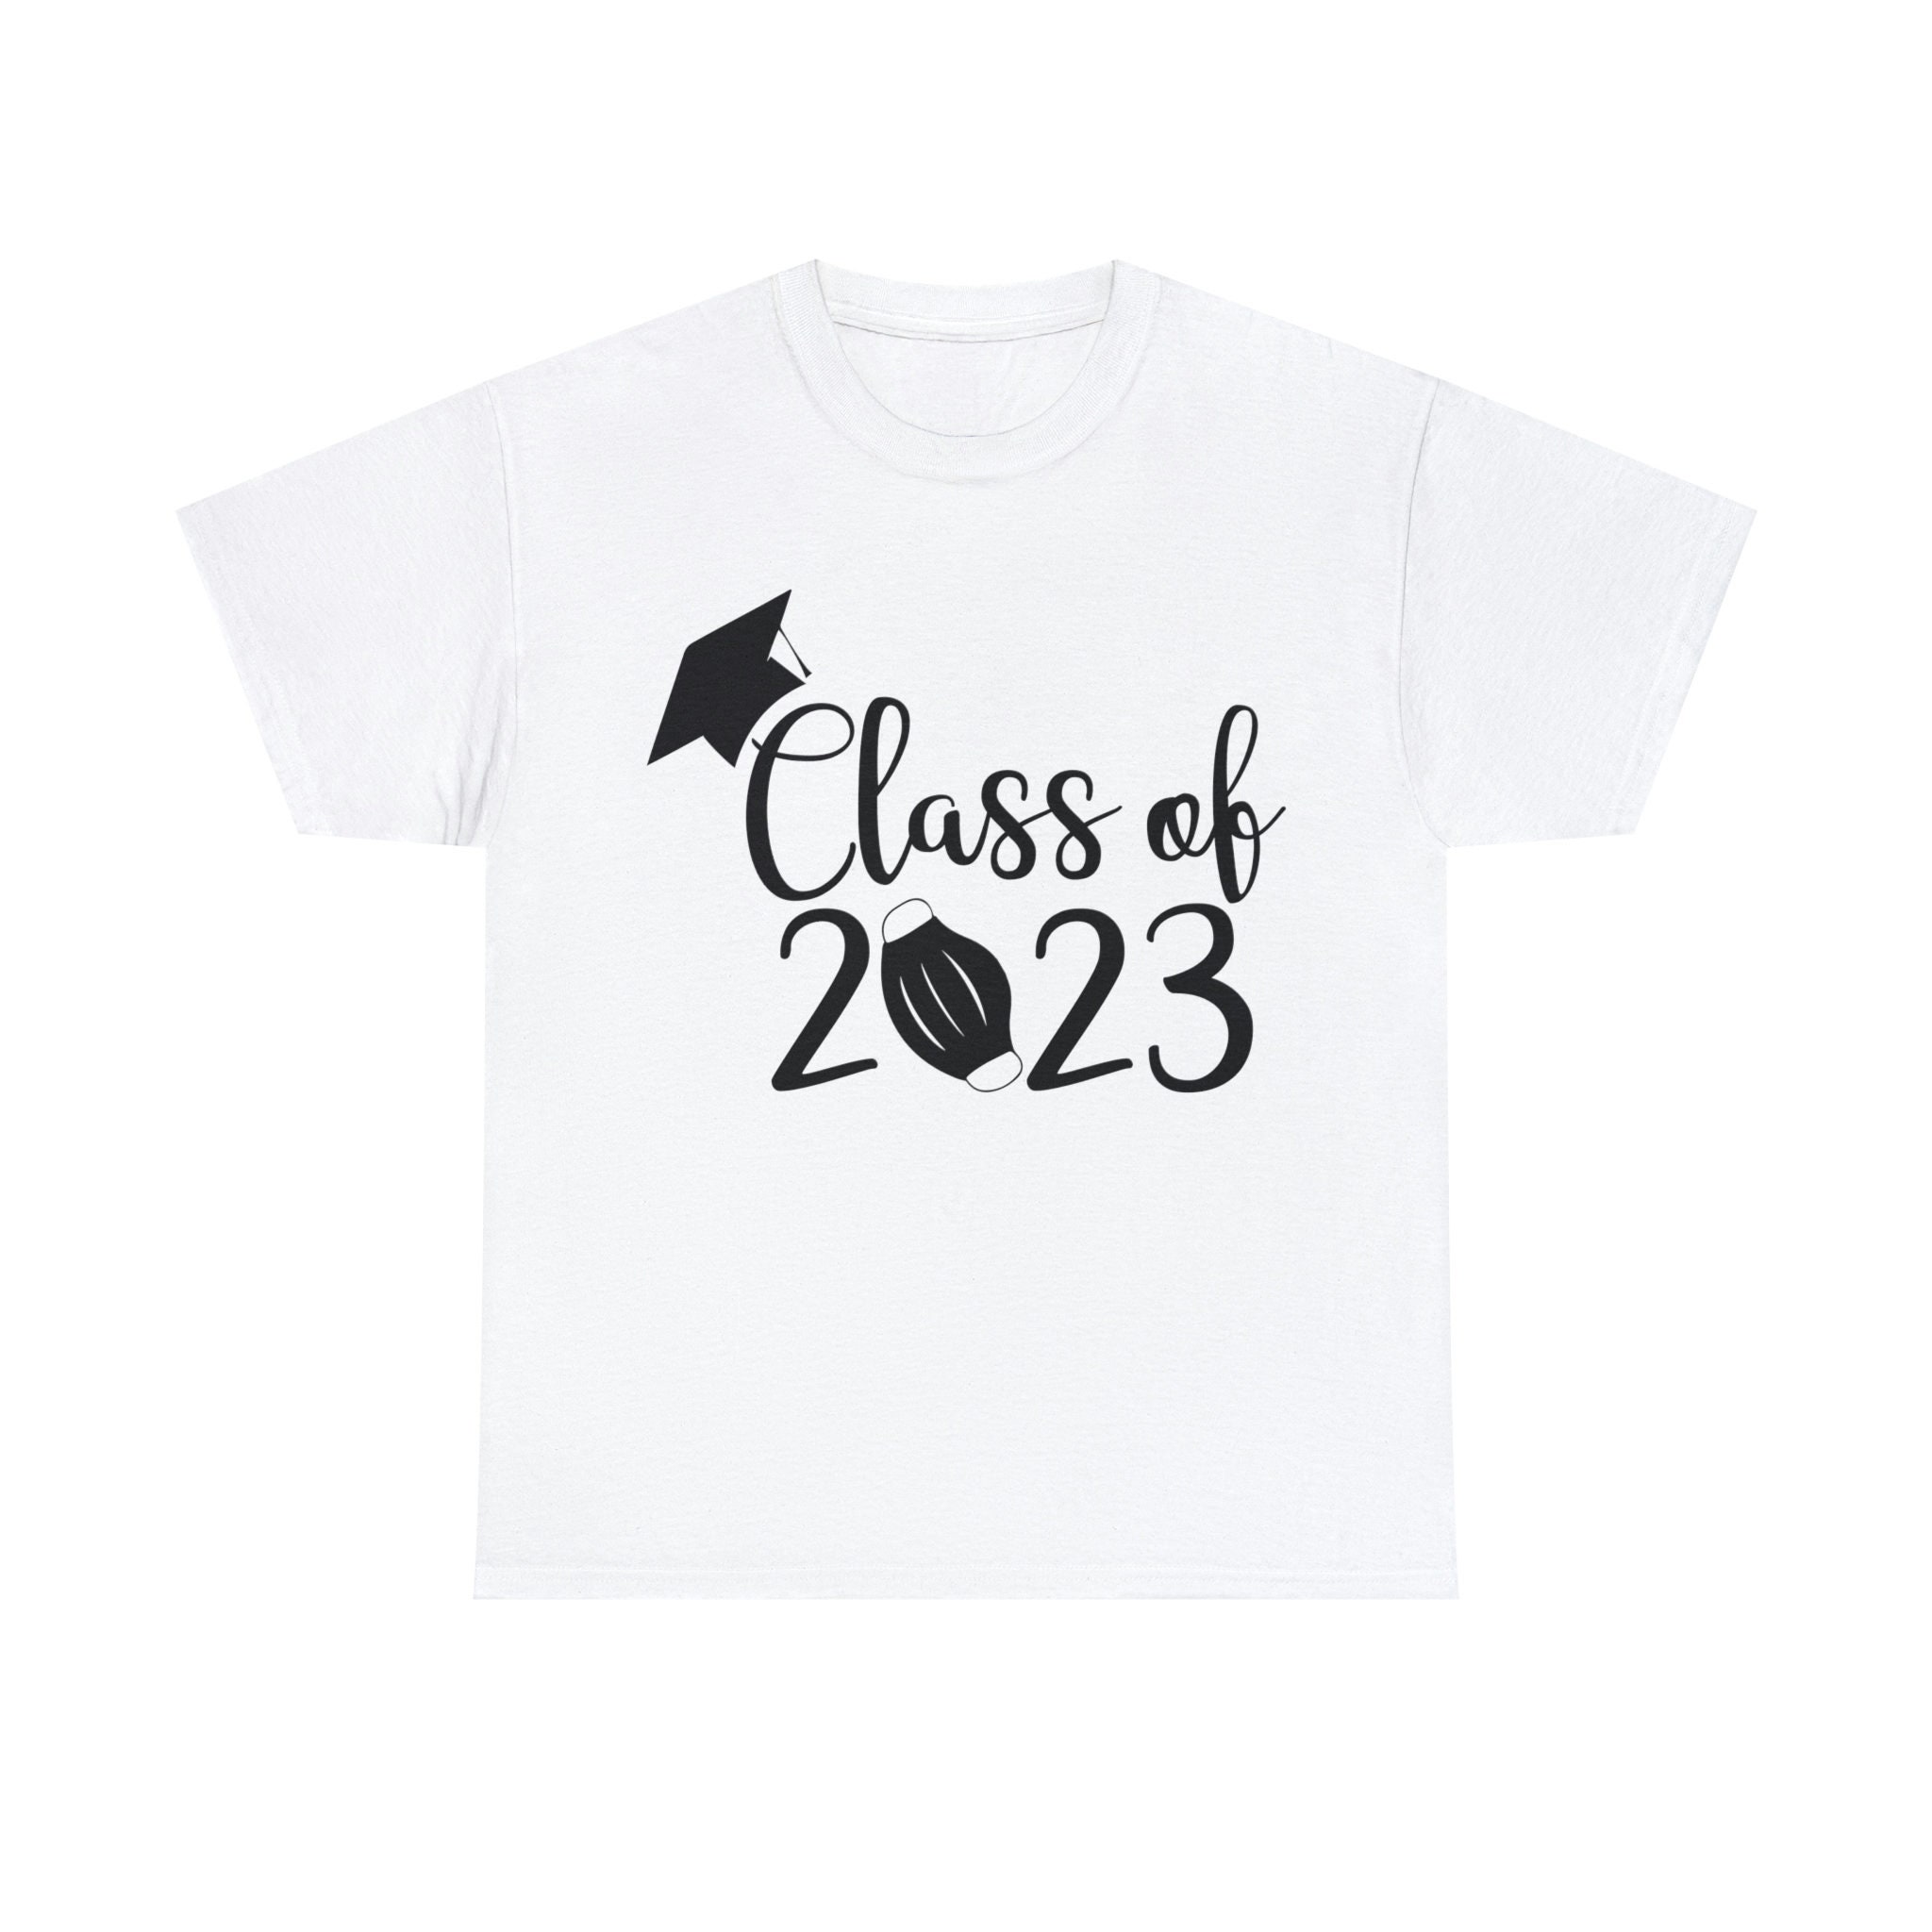 Class of 2023 Adult Graduation T-shirt Commemorate the picture